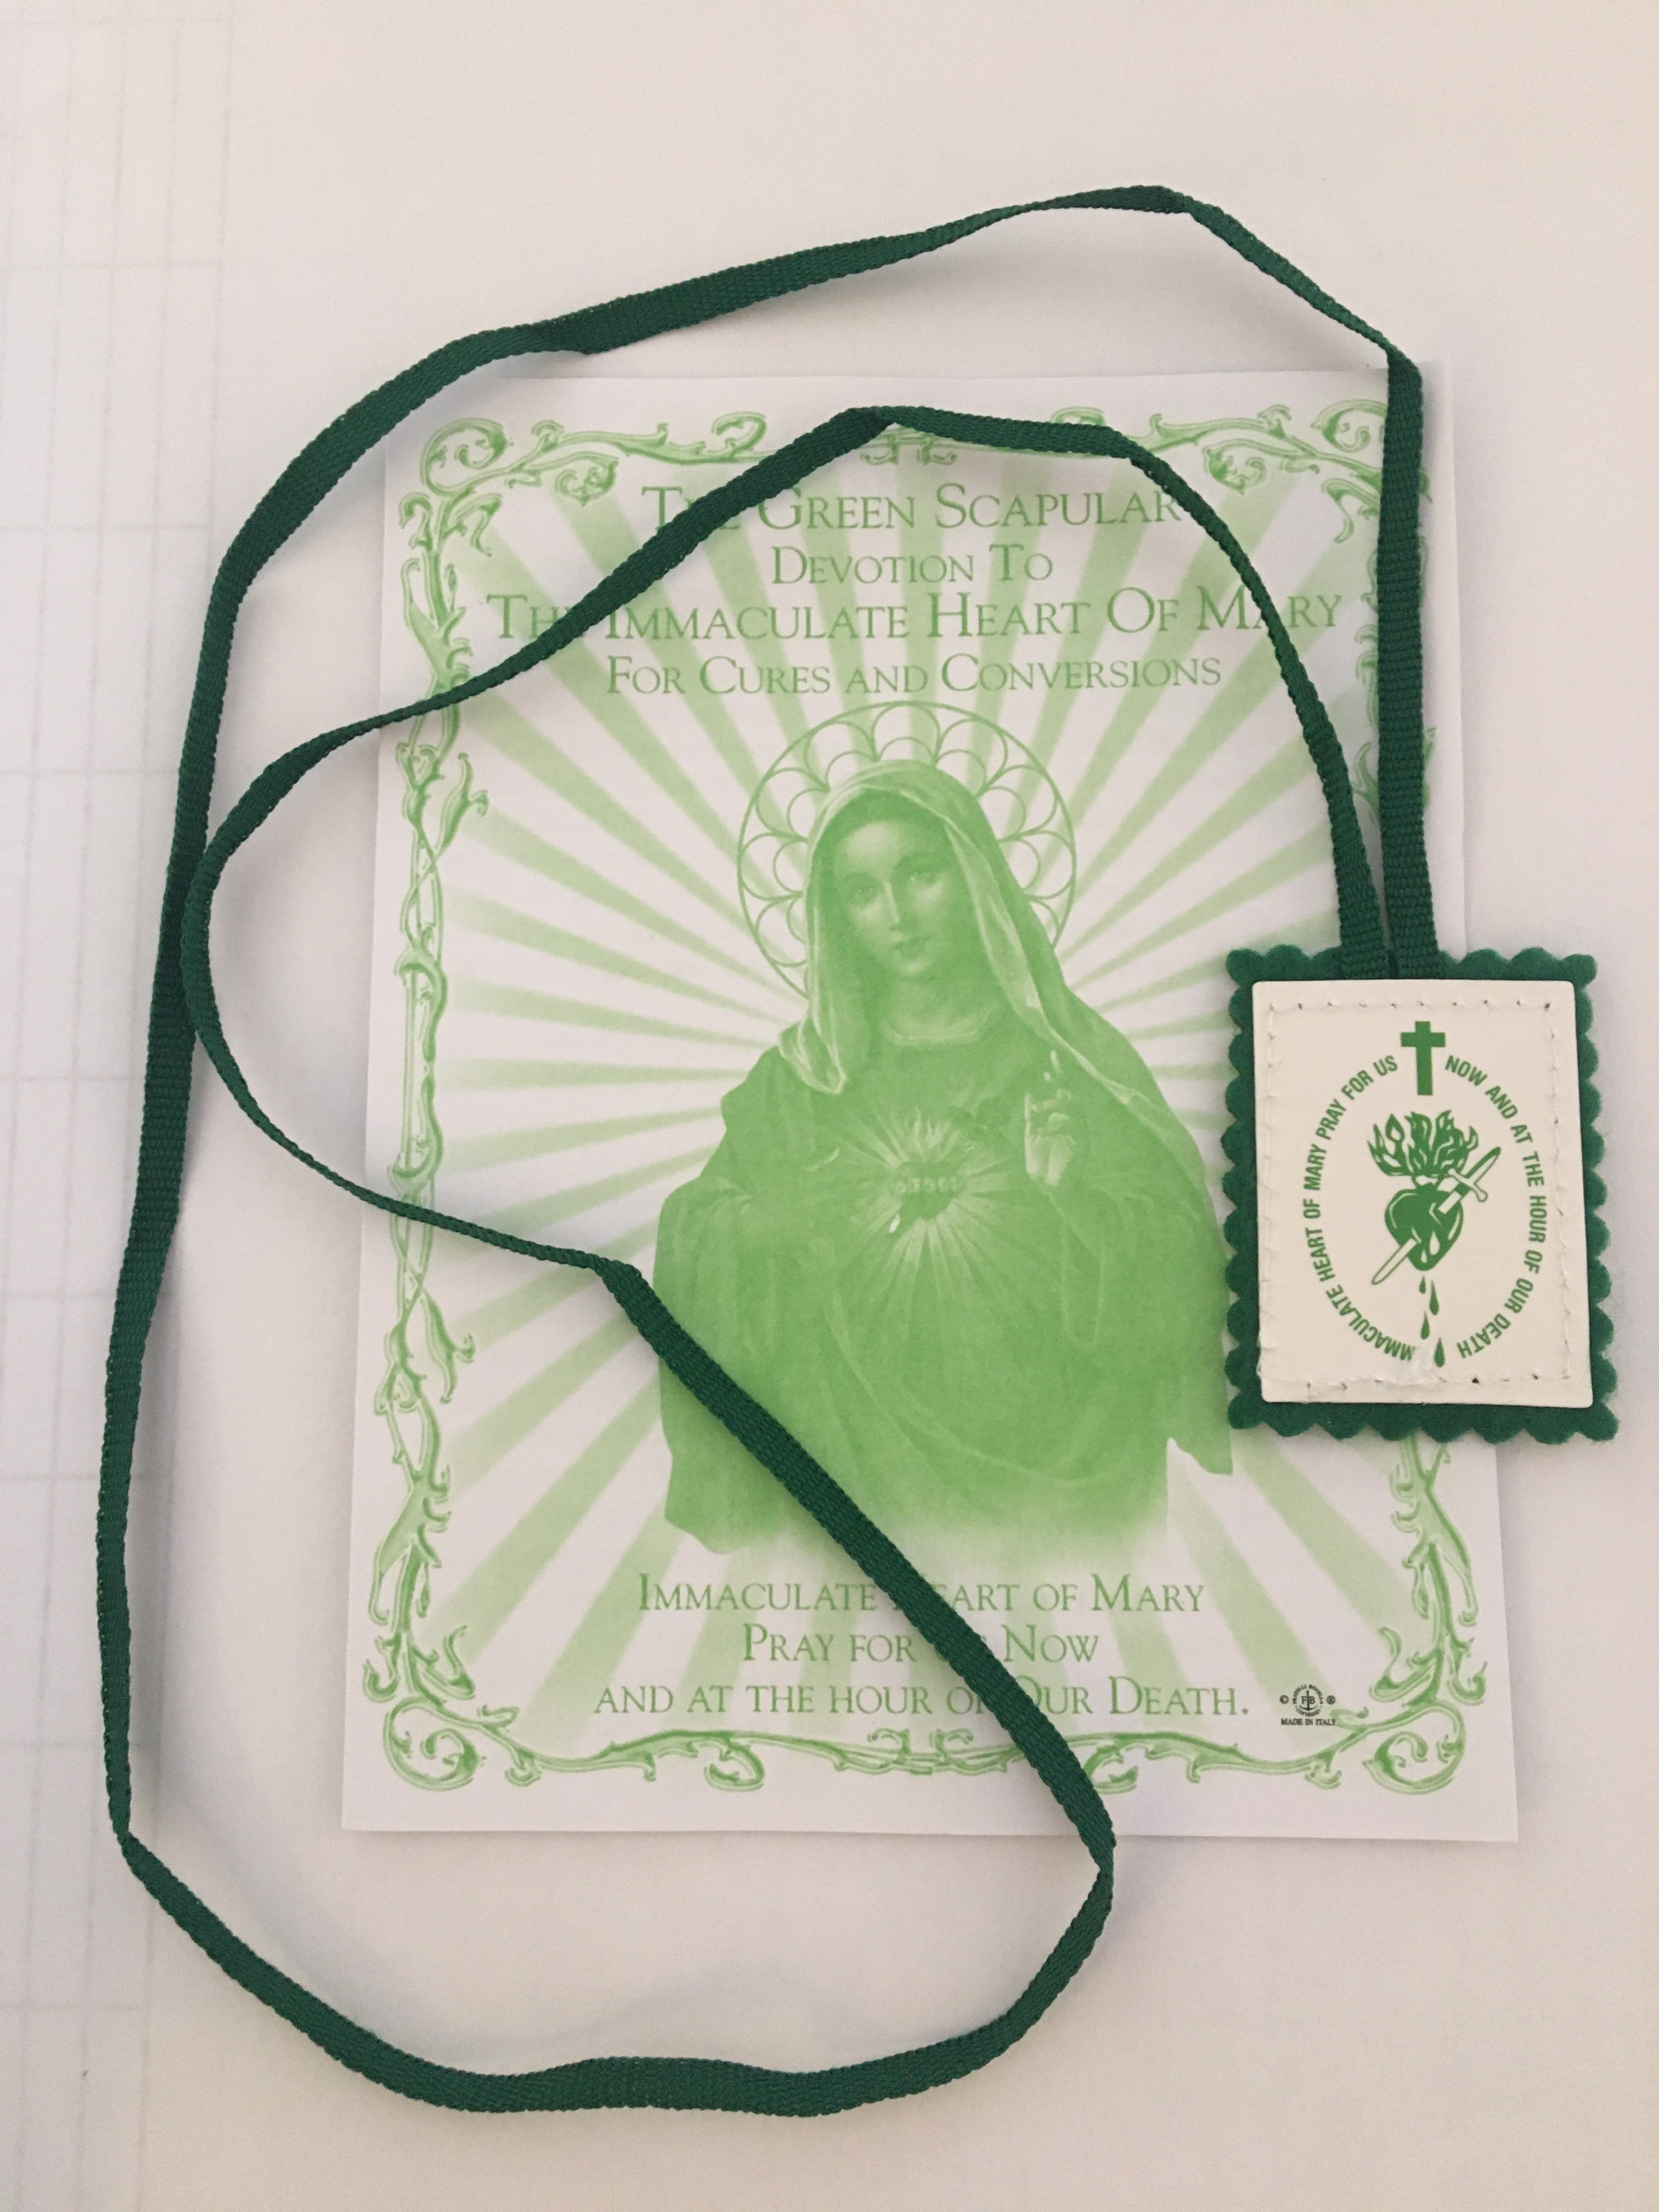 front and back of Green Scapular